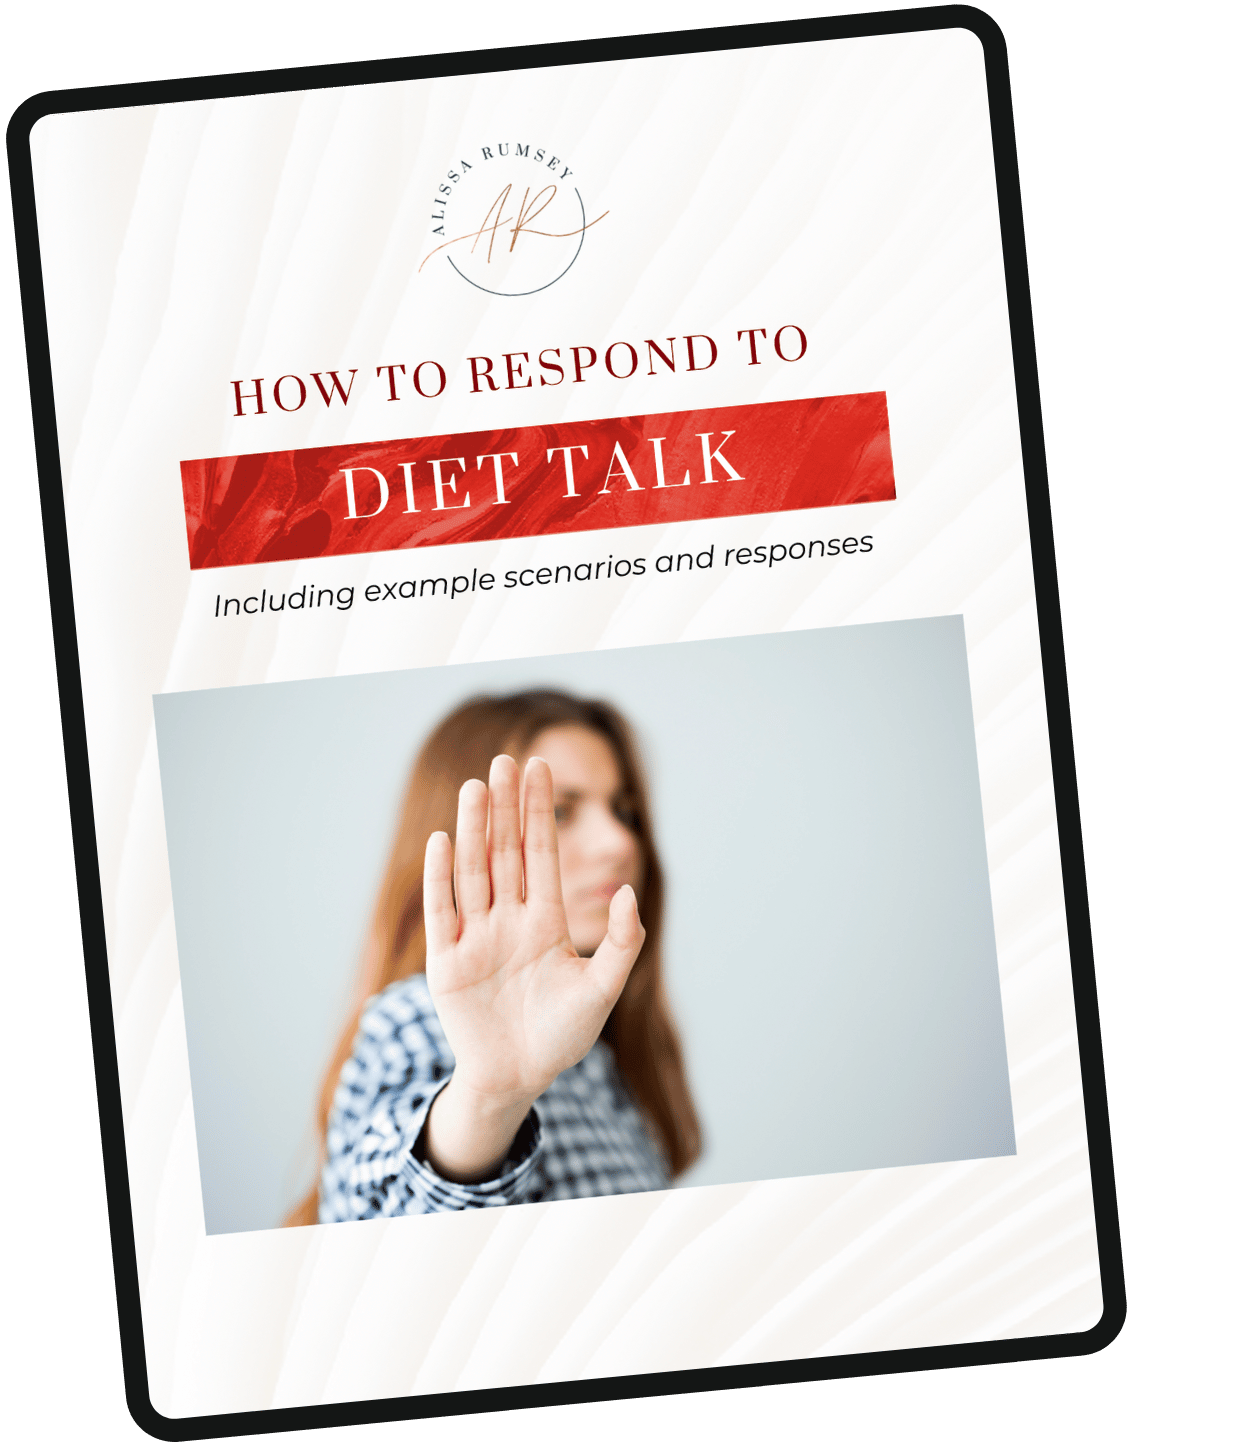 ipad with image of how to respond to diet talk handout